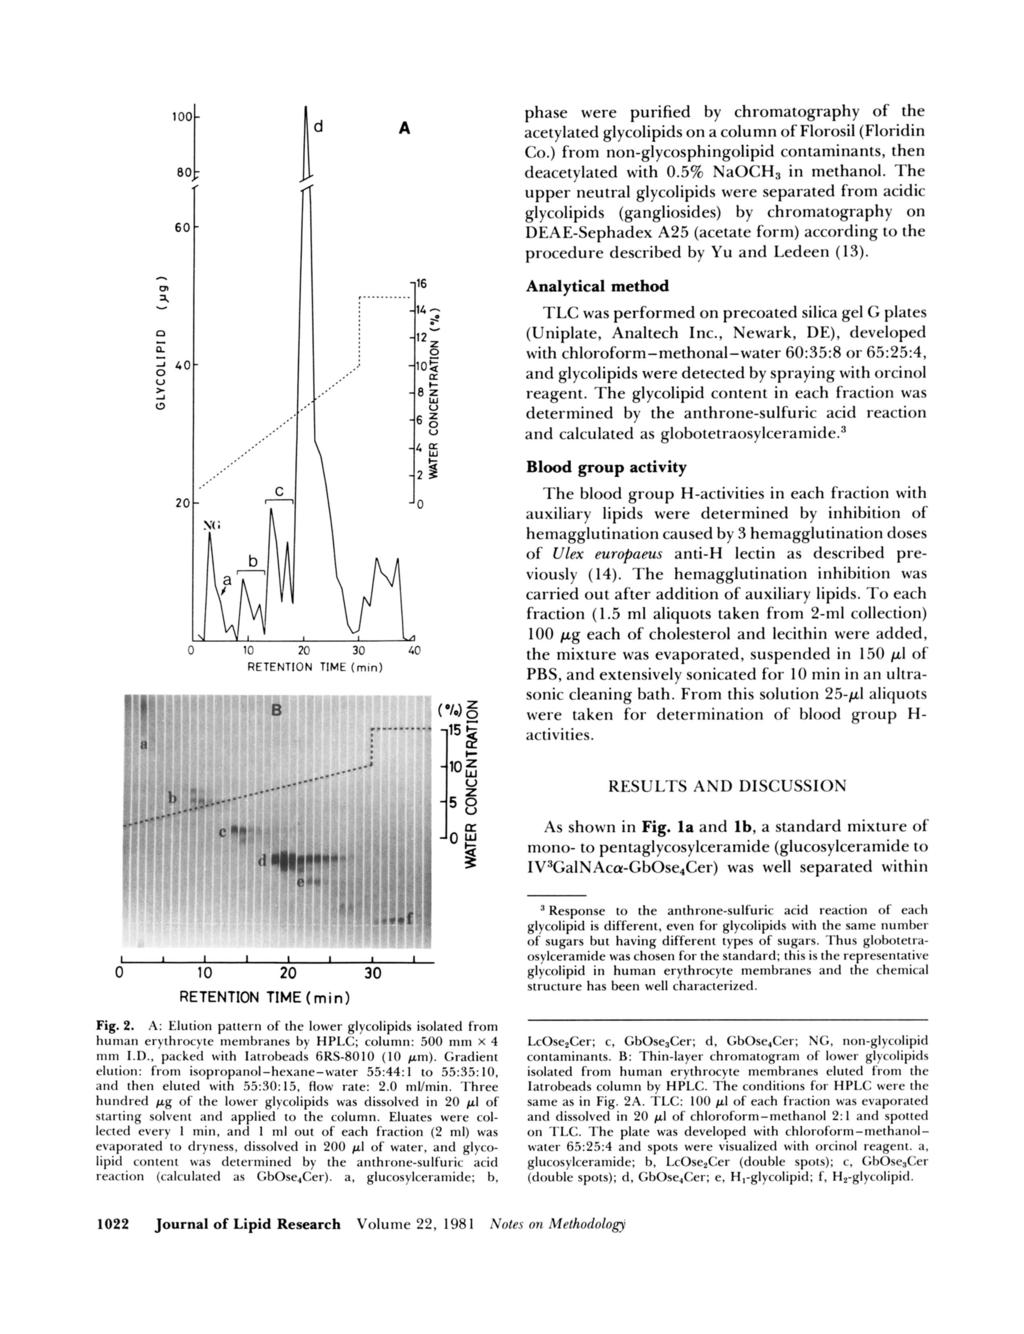 A,..._ 0 10 20 30 40 phase were purified by chromatography of the acetylated glycolipids on a column of Florosil (Floridin Co.) from non-glycosphingolipid contaminants, then deacetylated with 0.